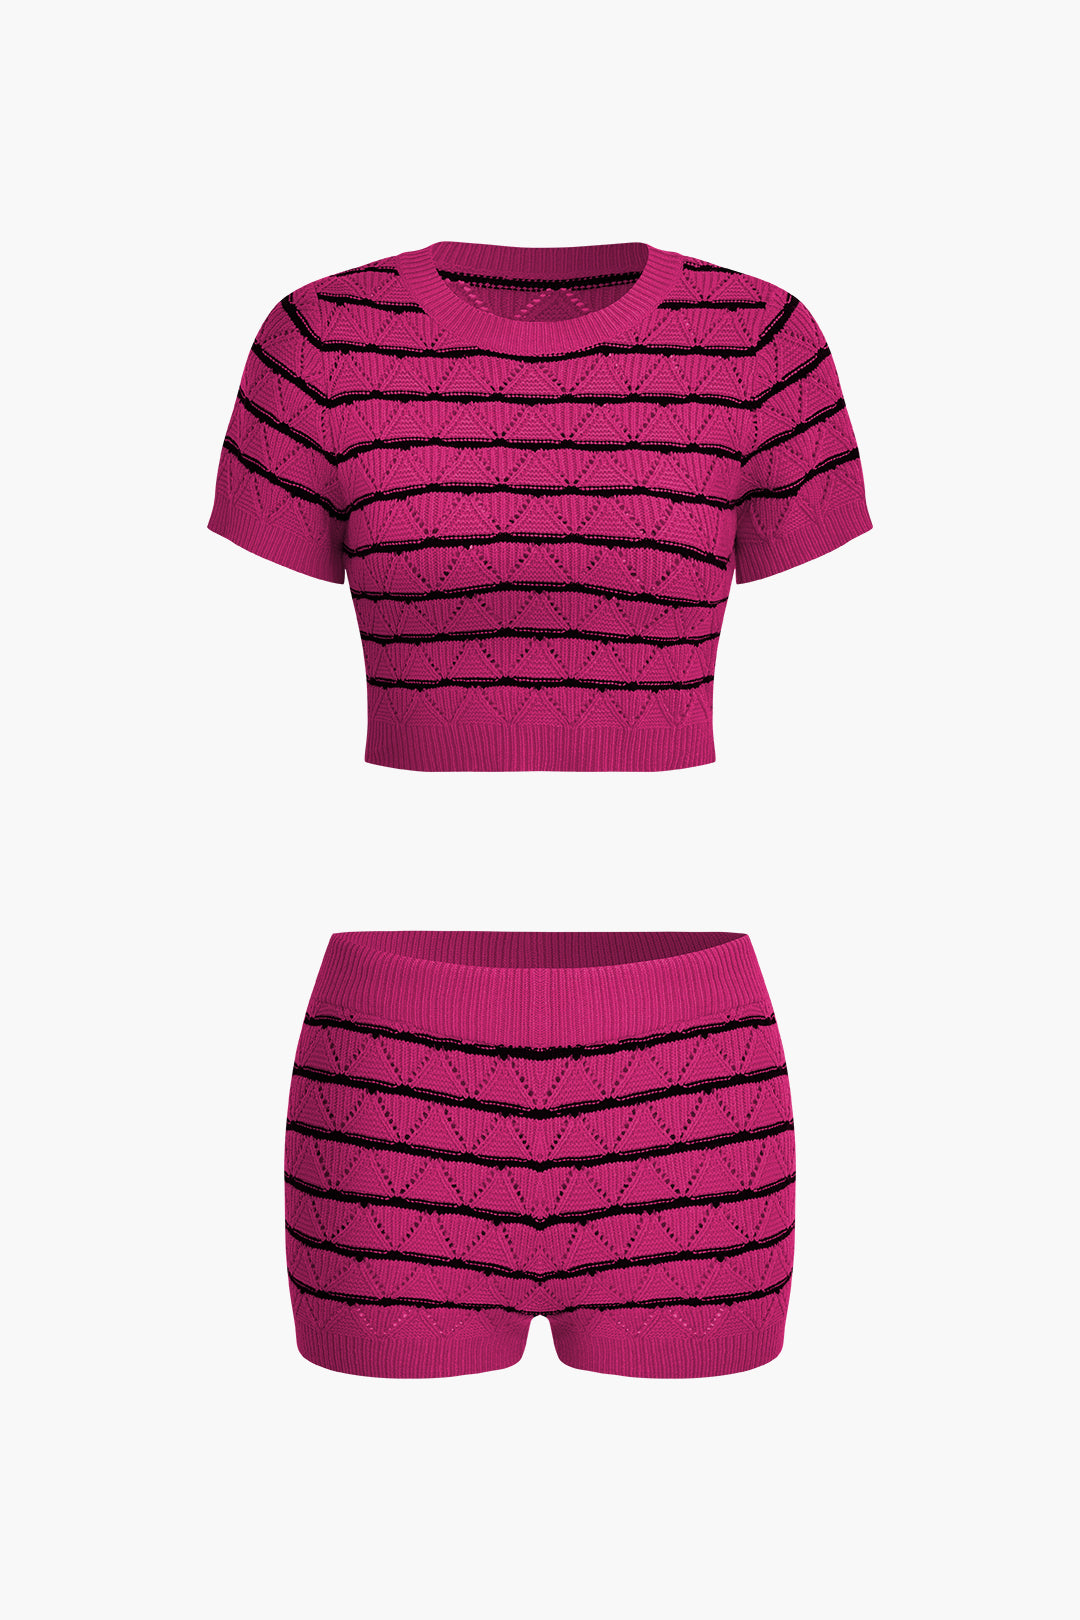 Stripe Crop Knit Top And Shorts Set